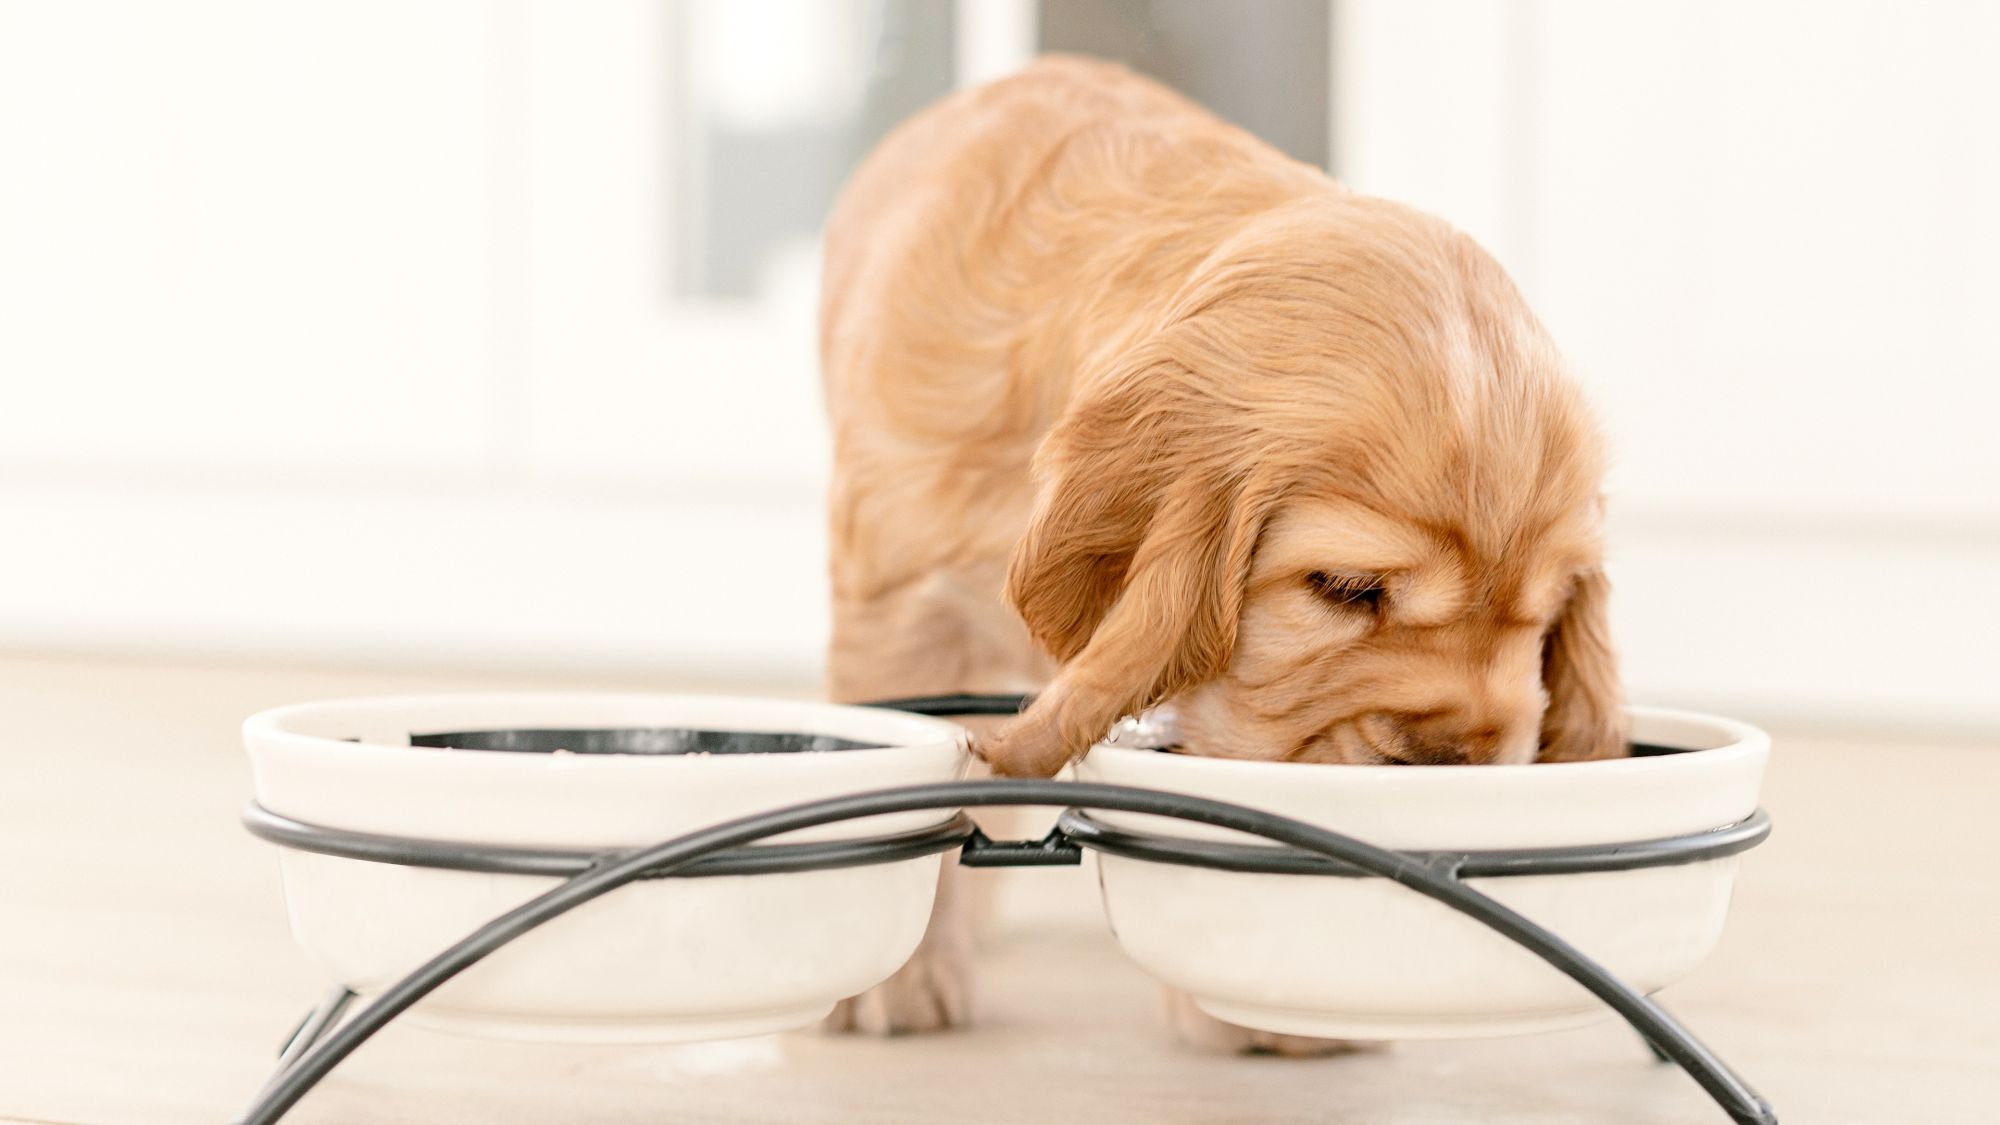 English Cocker Spaniel puppy standing in a kitchen drinking from a water bowl